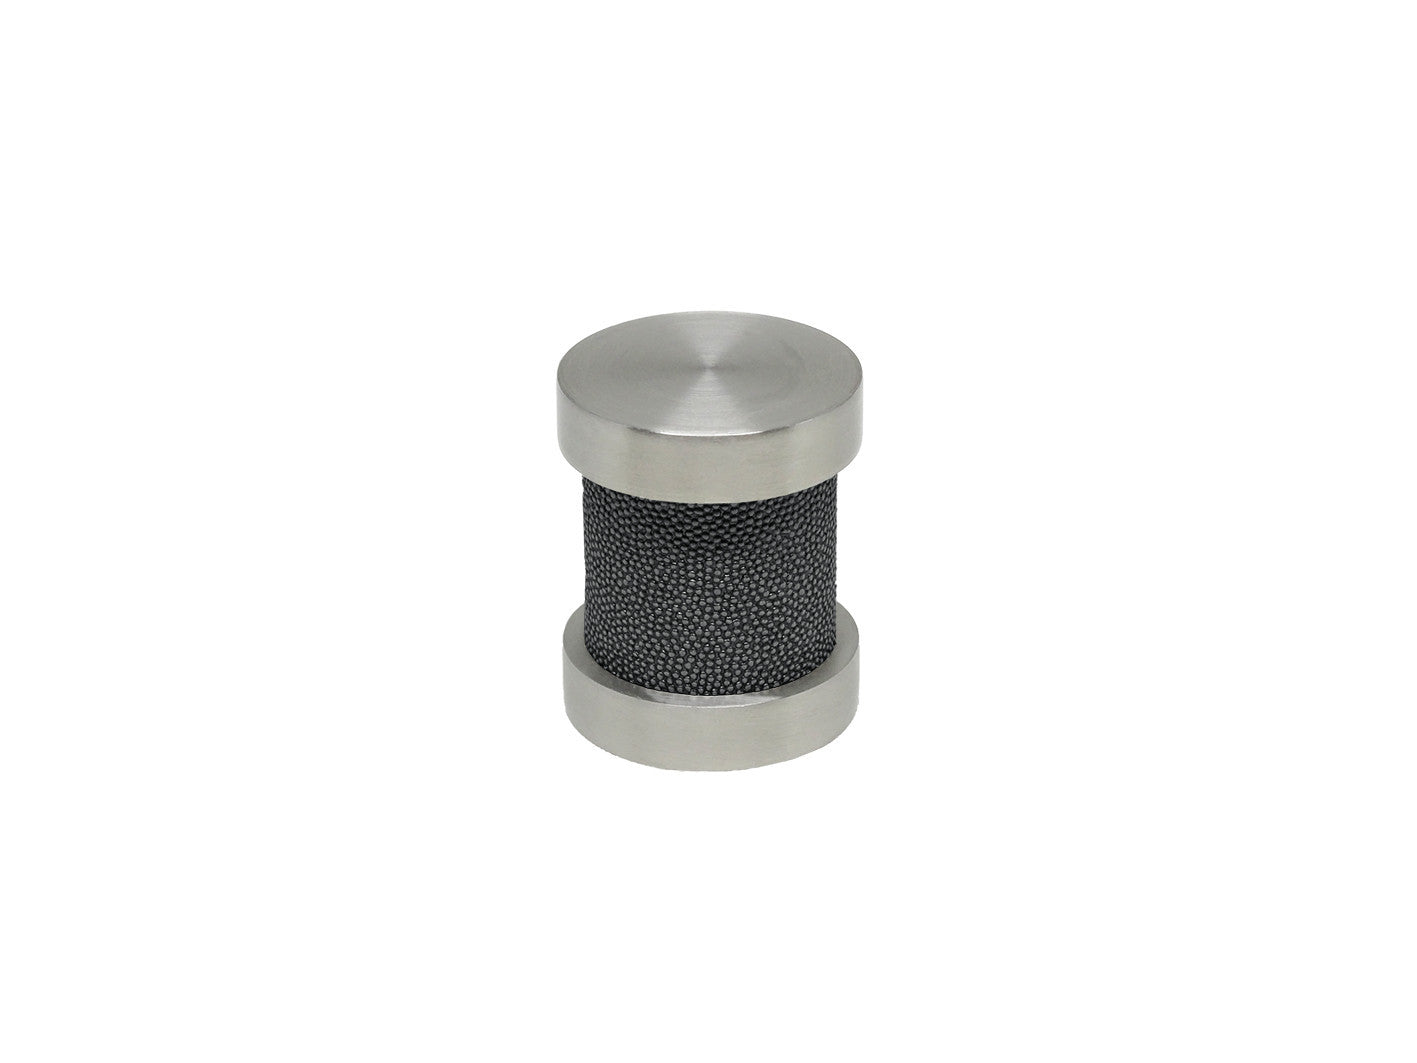 Black pepper groove finial | Walcot House 30mm stainless steel collection